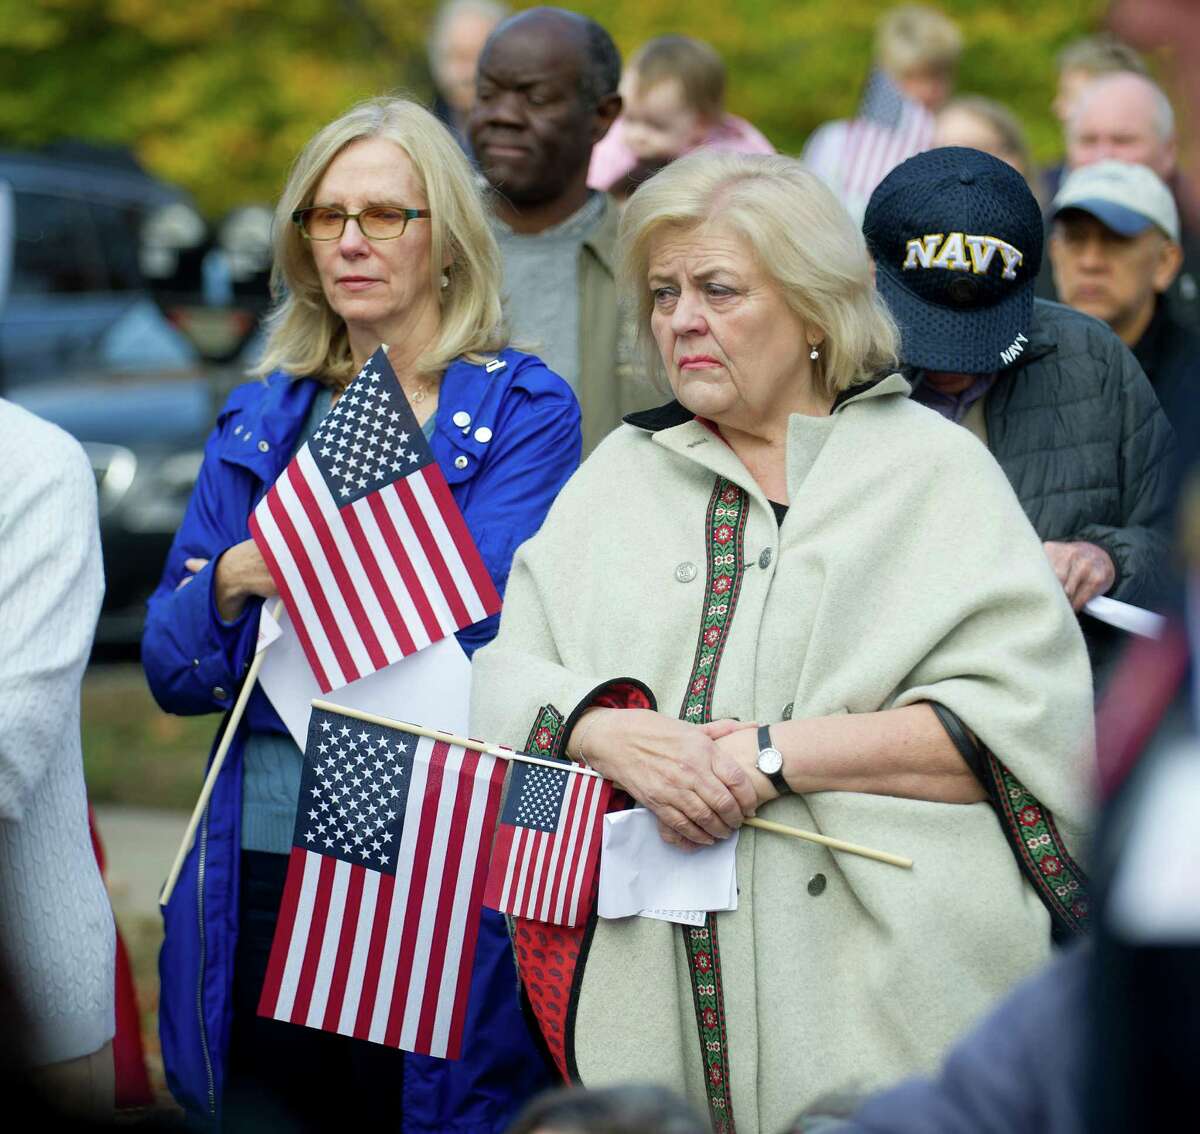 The annual Community Walk down Greenwich Ave. and Greenwich American Legion ceremony in Greenwich, Conn., on Veteran's Day, Tuesday, November 11, 2014.